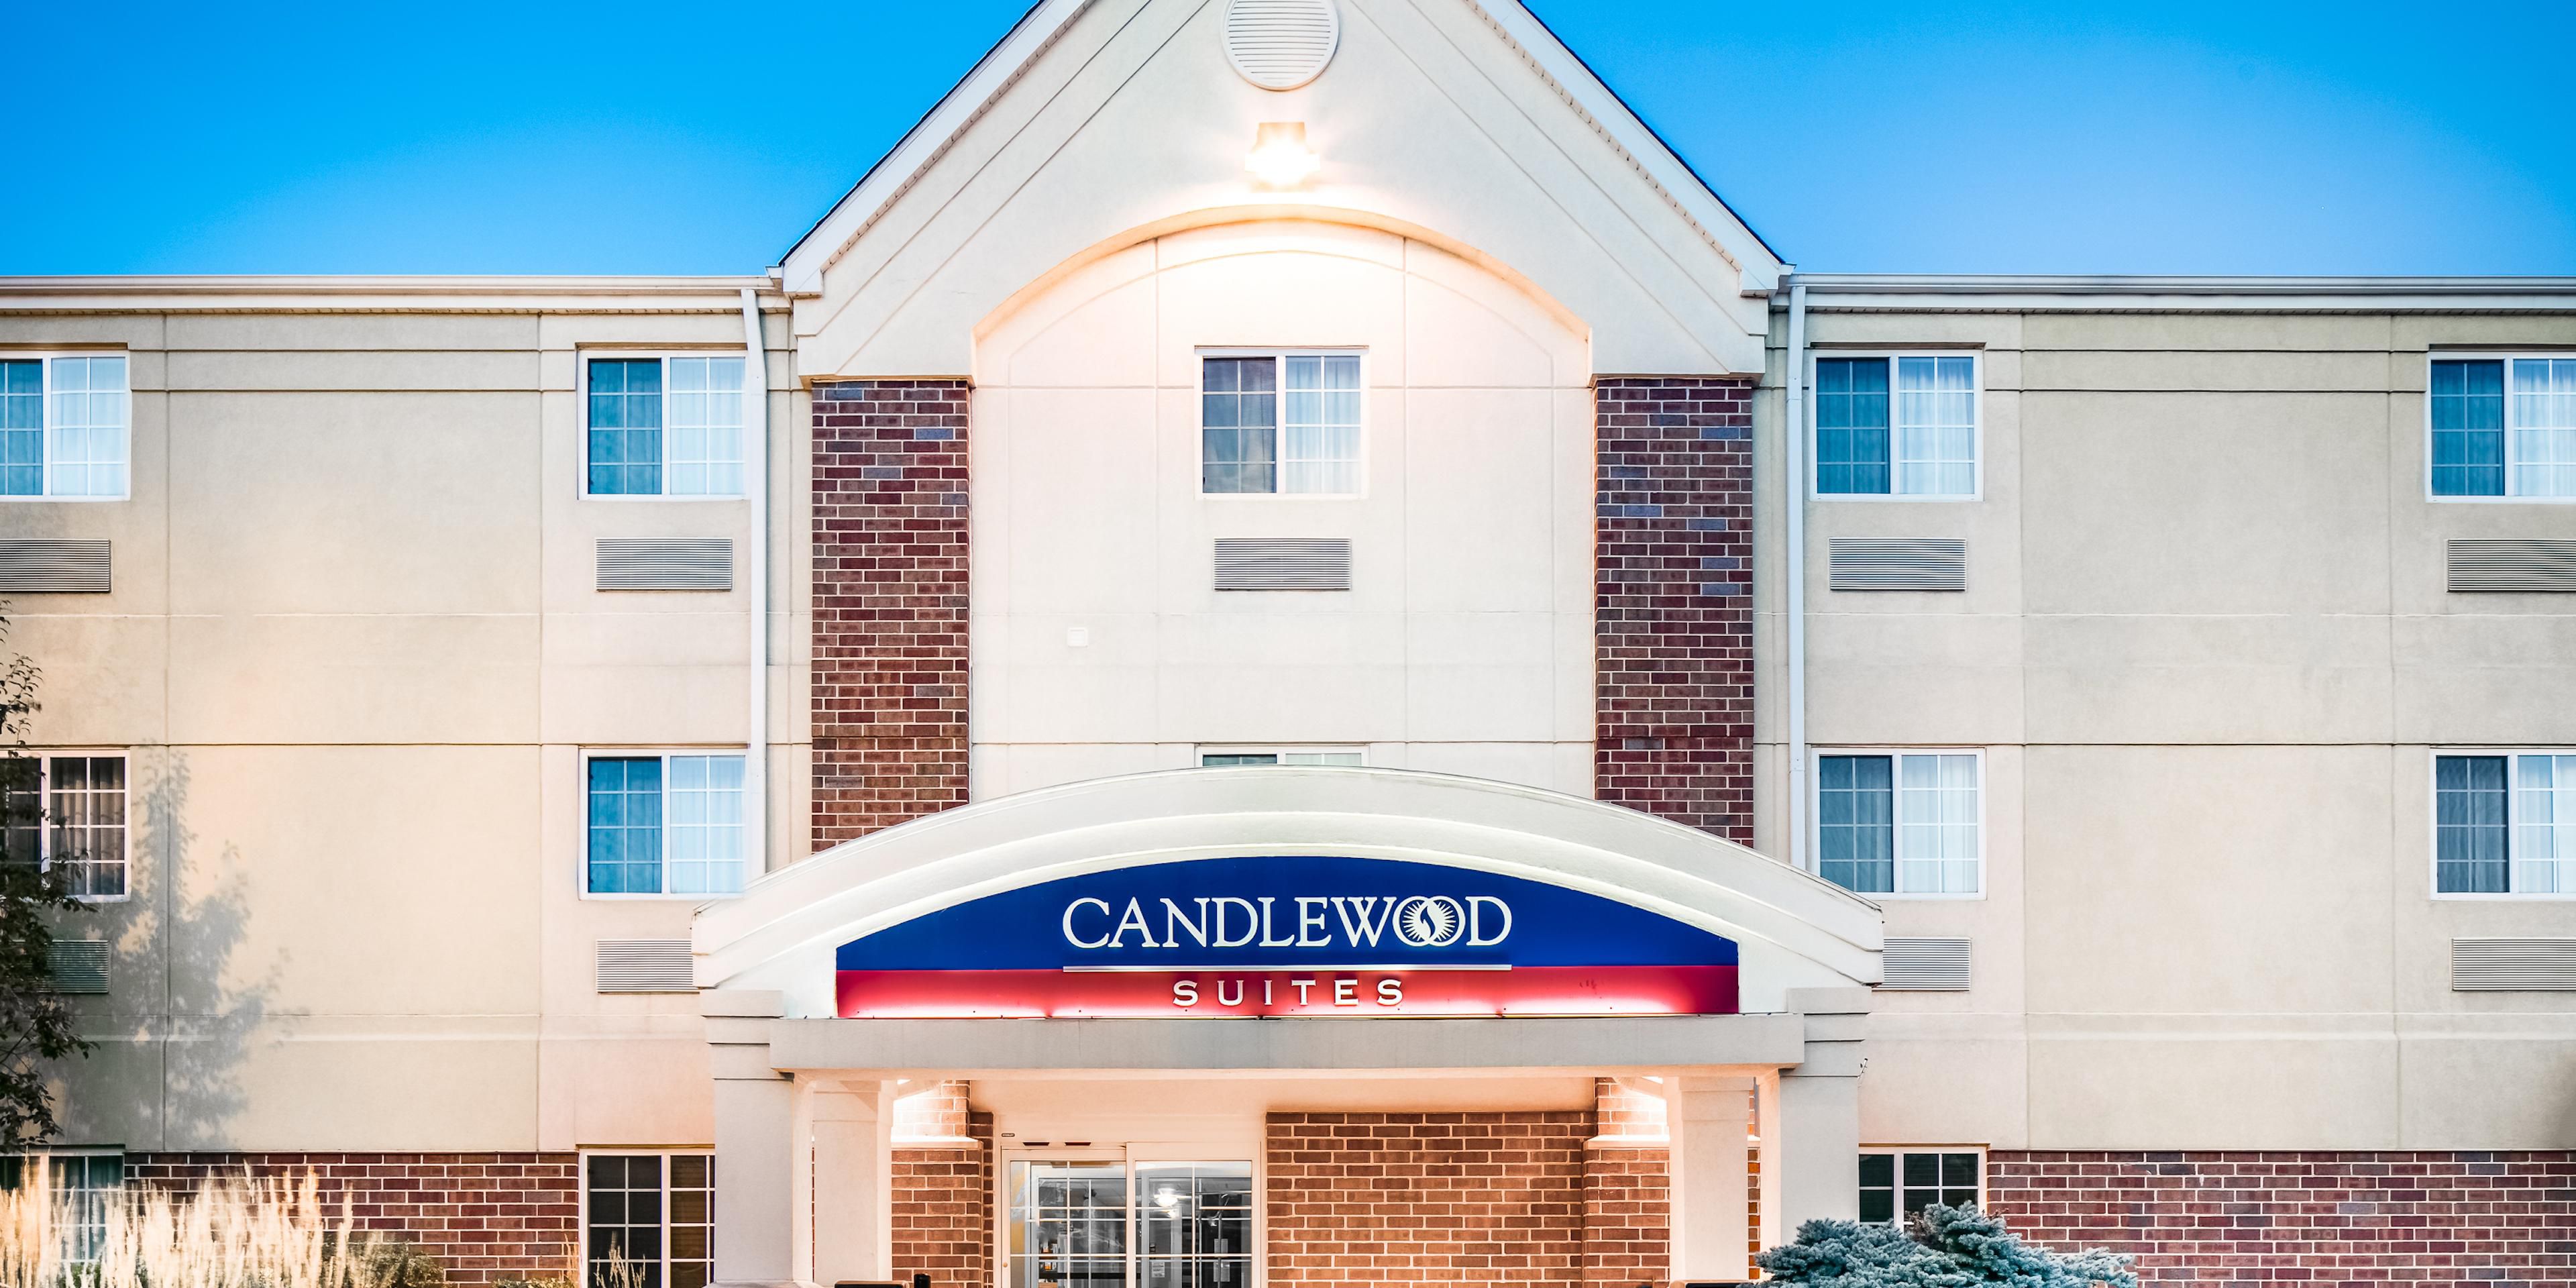 Candlewood Suites Kenosha Map & Driving Directions